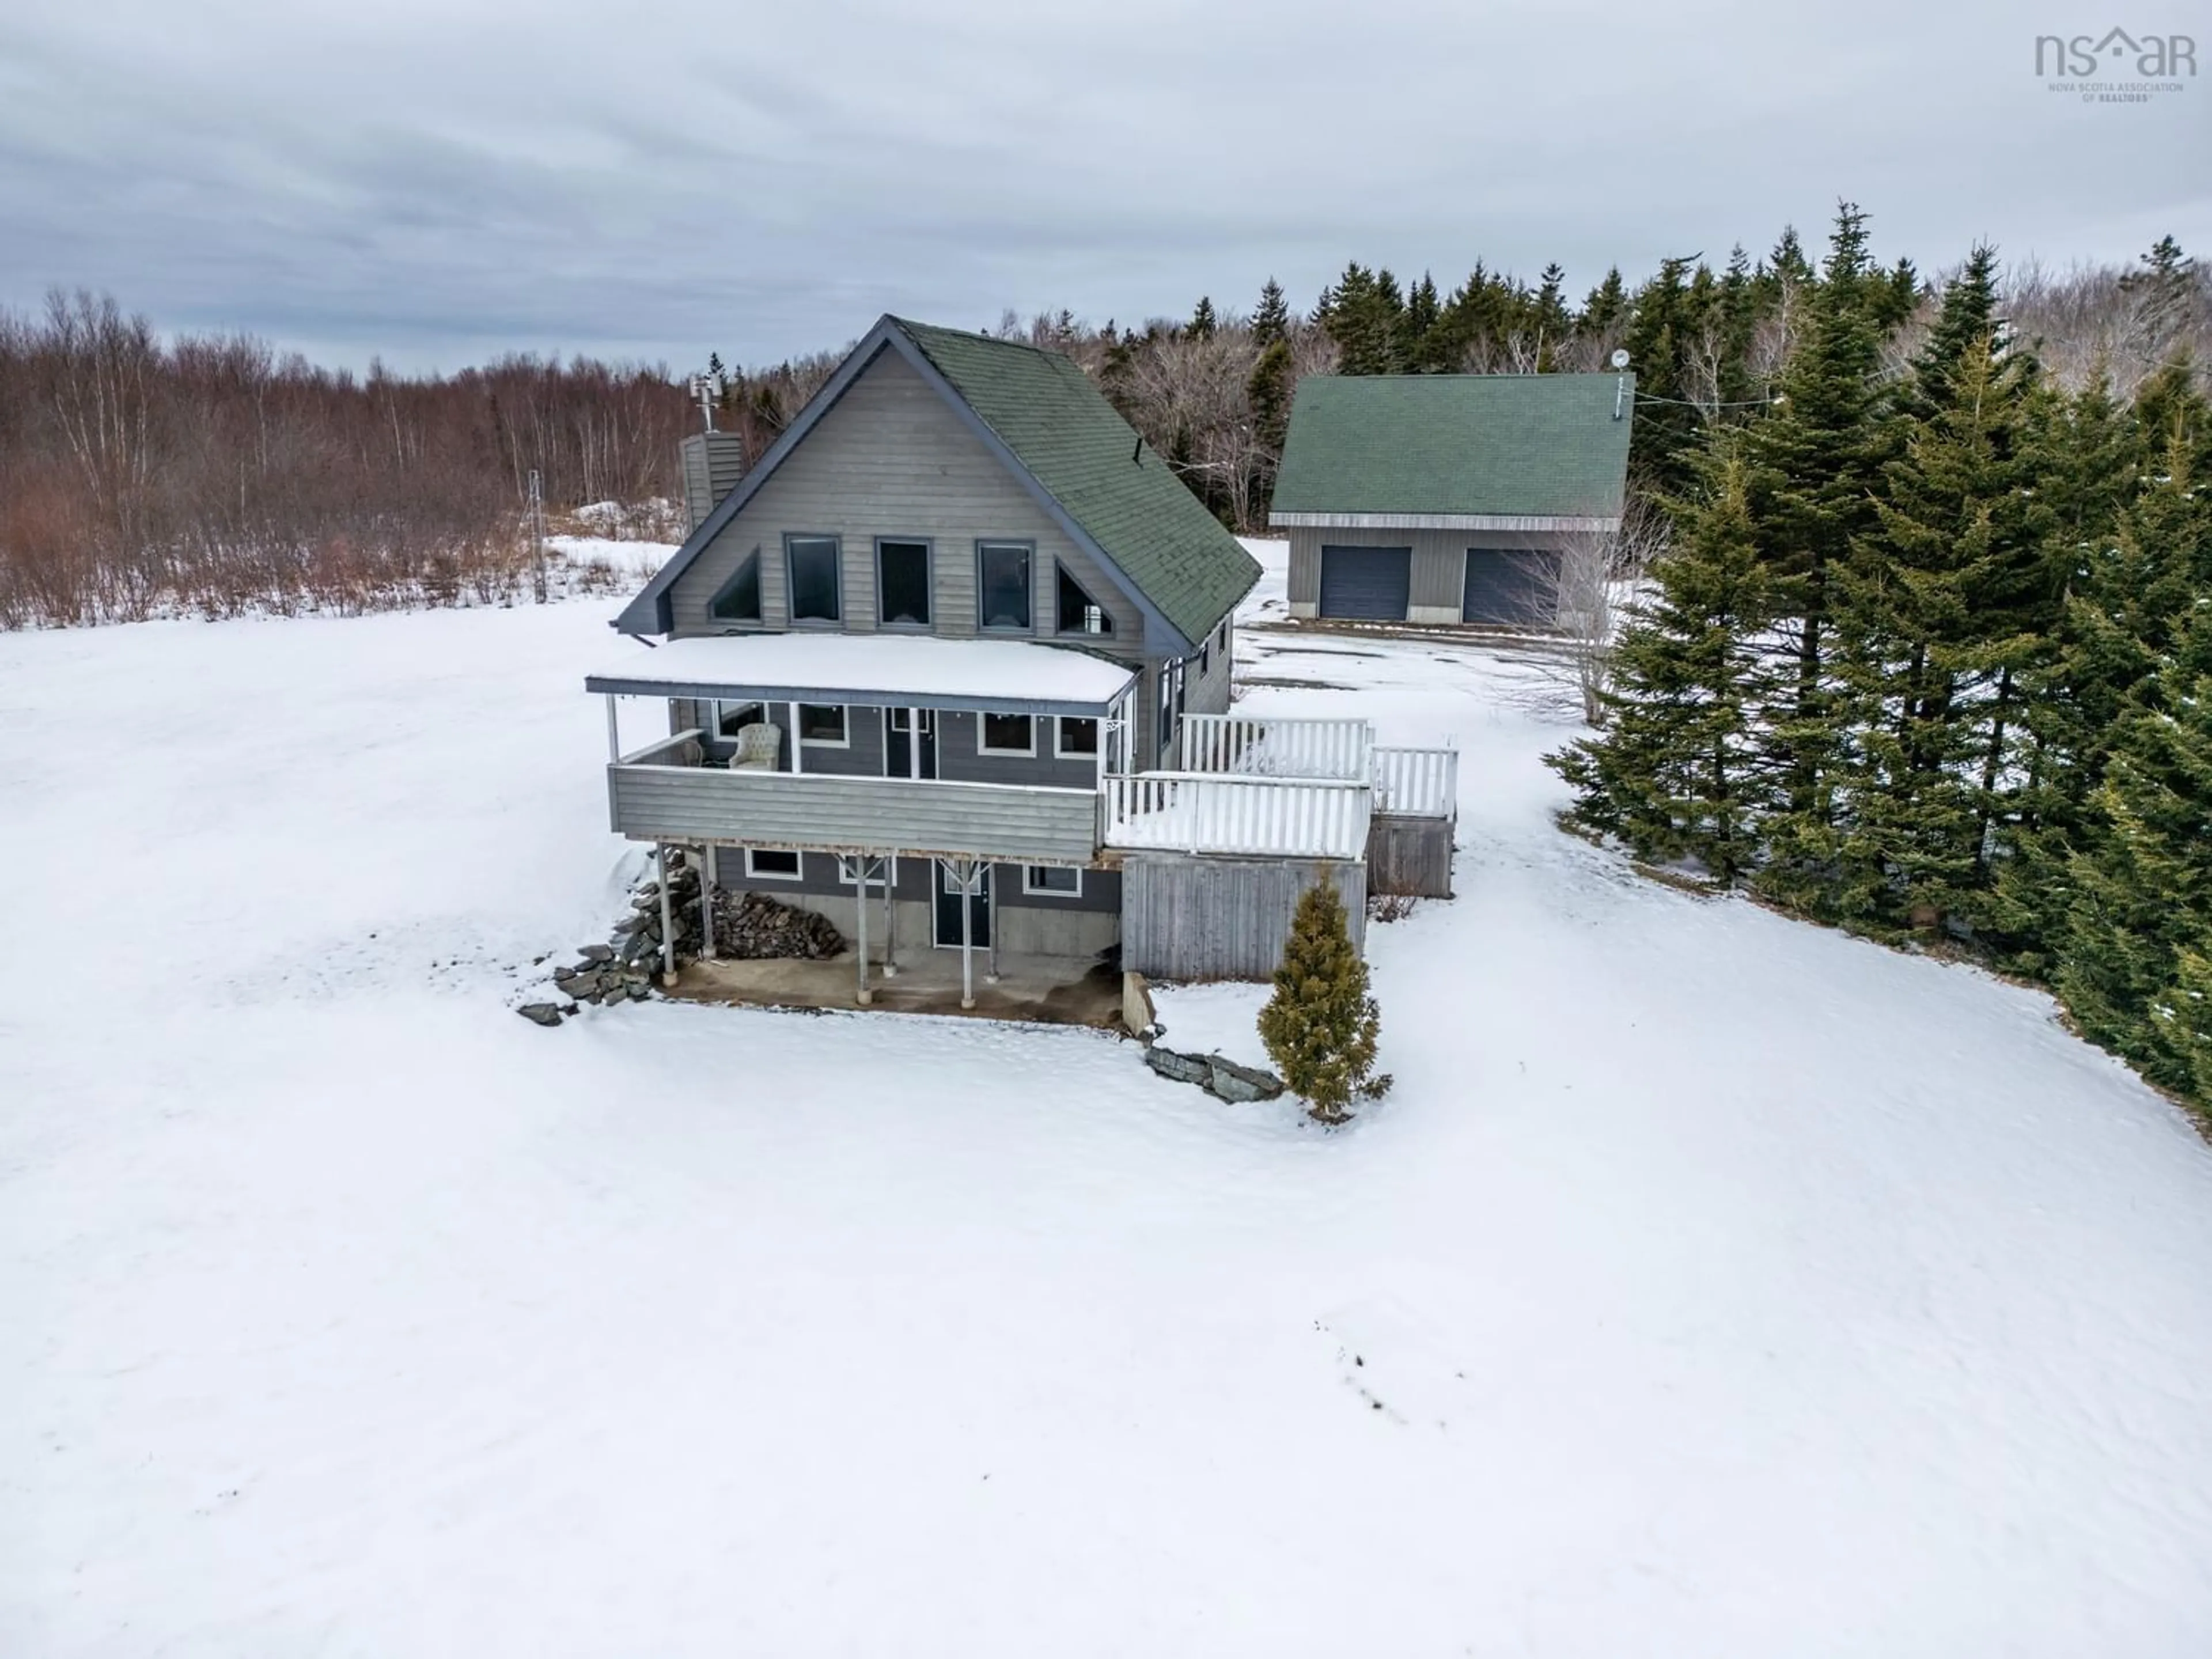 Home with unknown exterior material for 369 Bonnenfant Road, Church Point Nova Scotia B0W 1M0